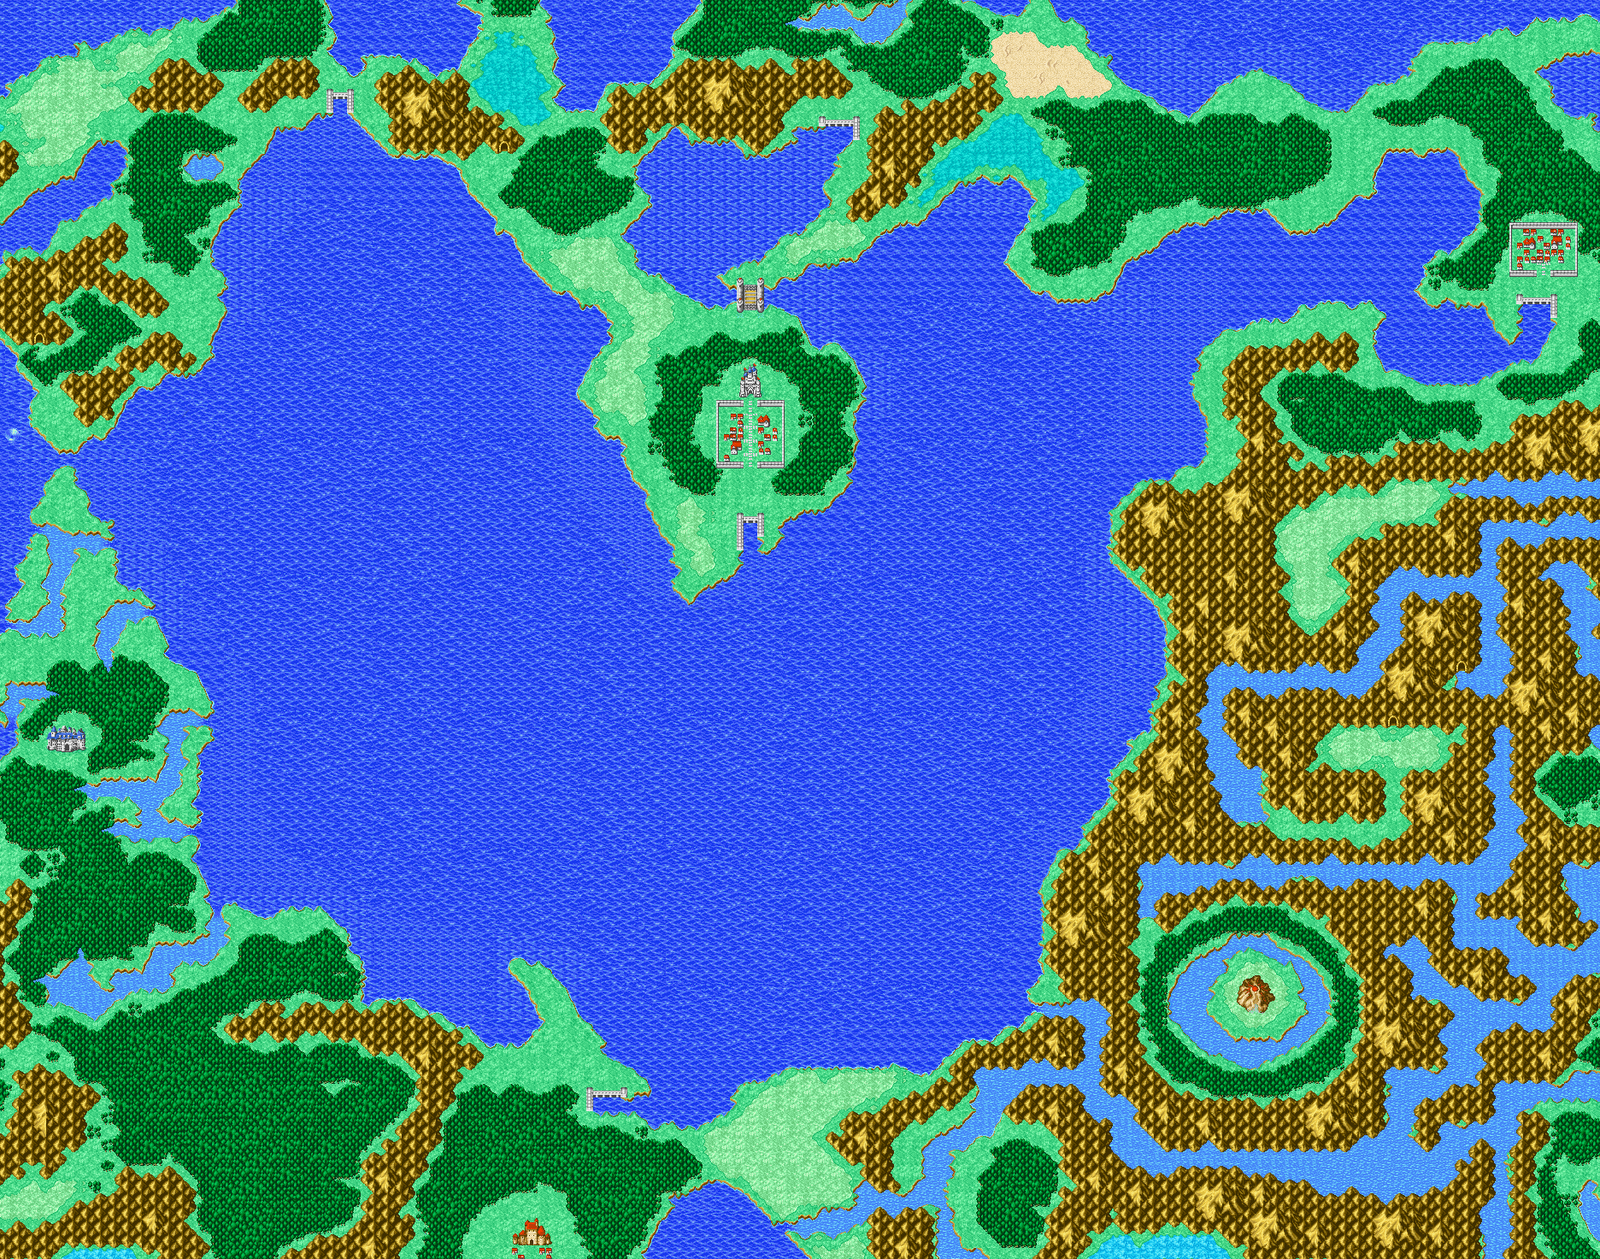 Gallery of Ff1 World Map Labeled.